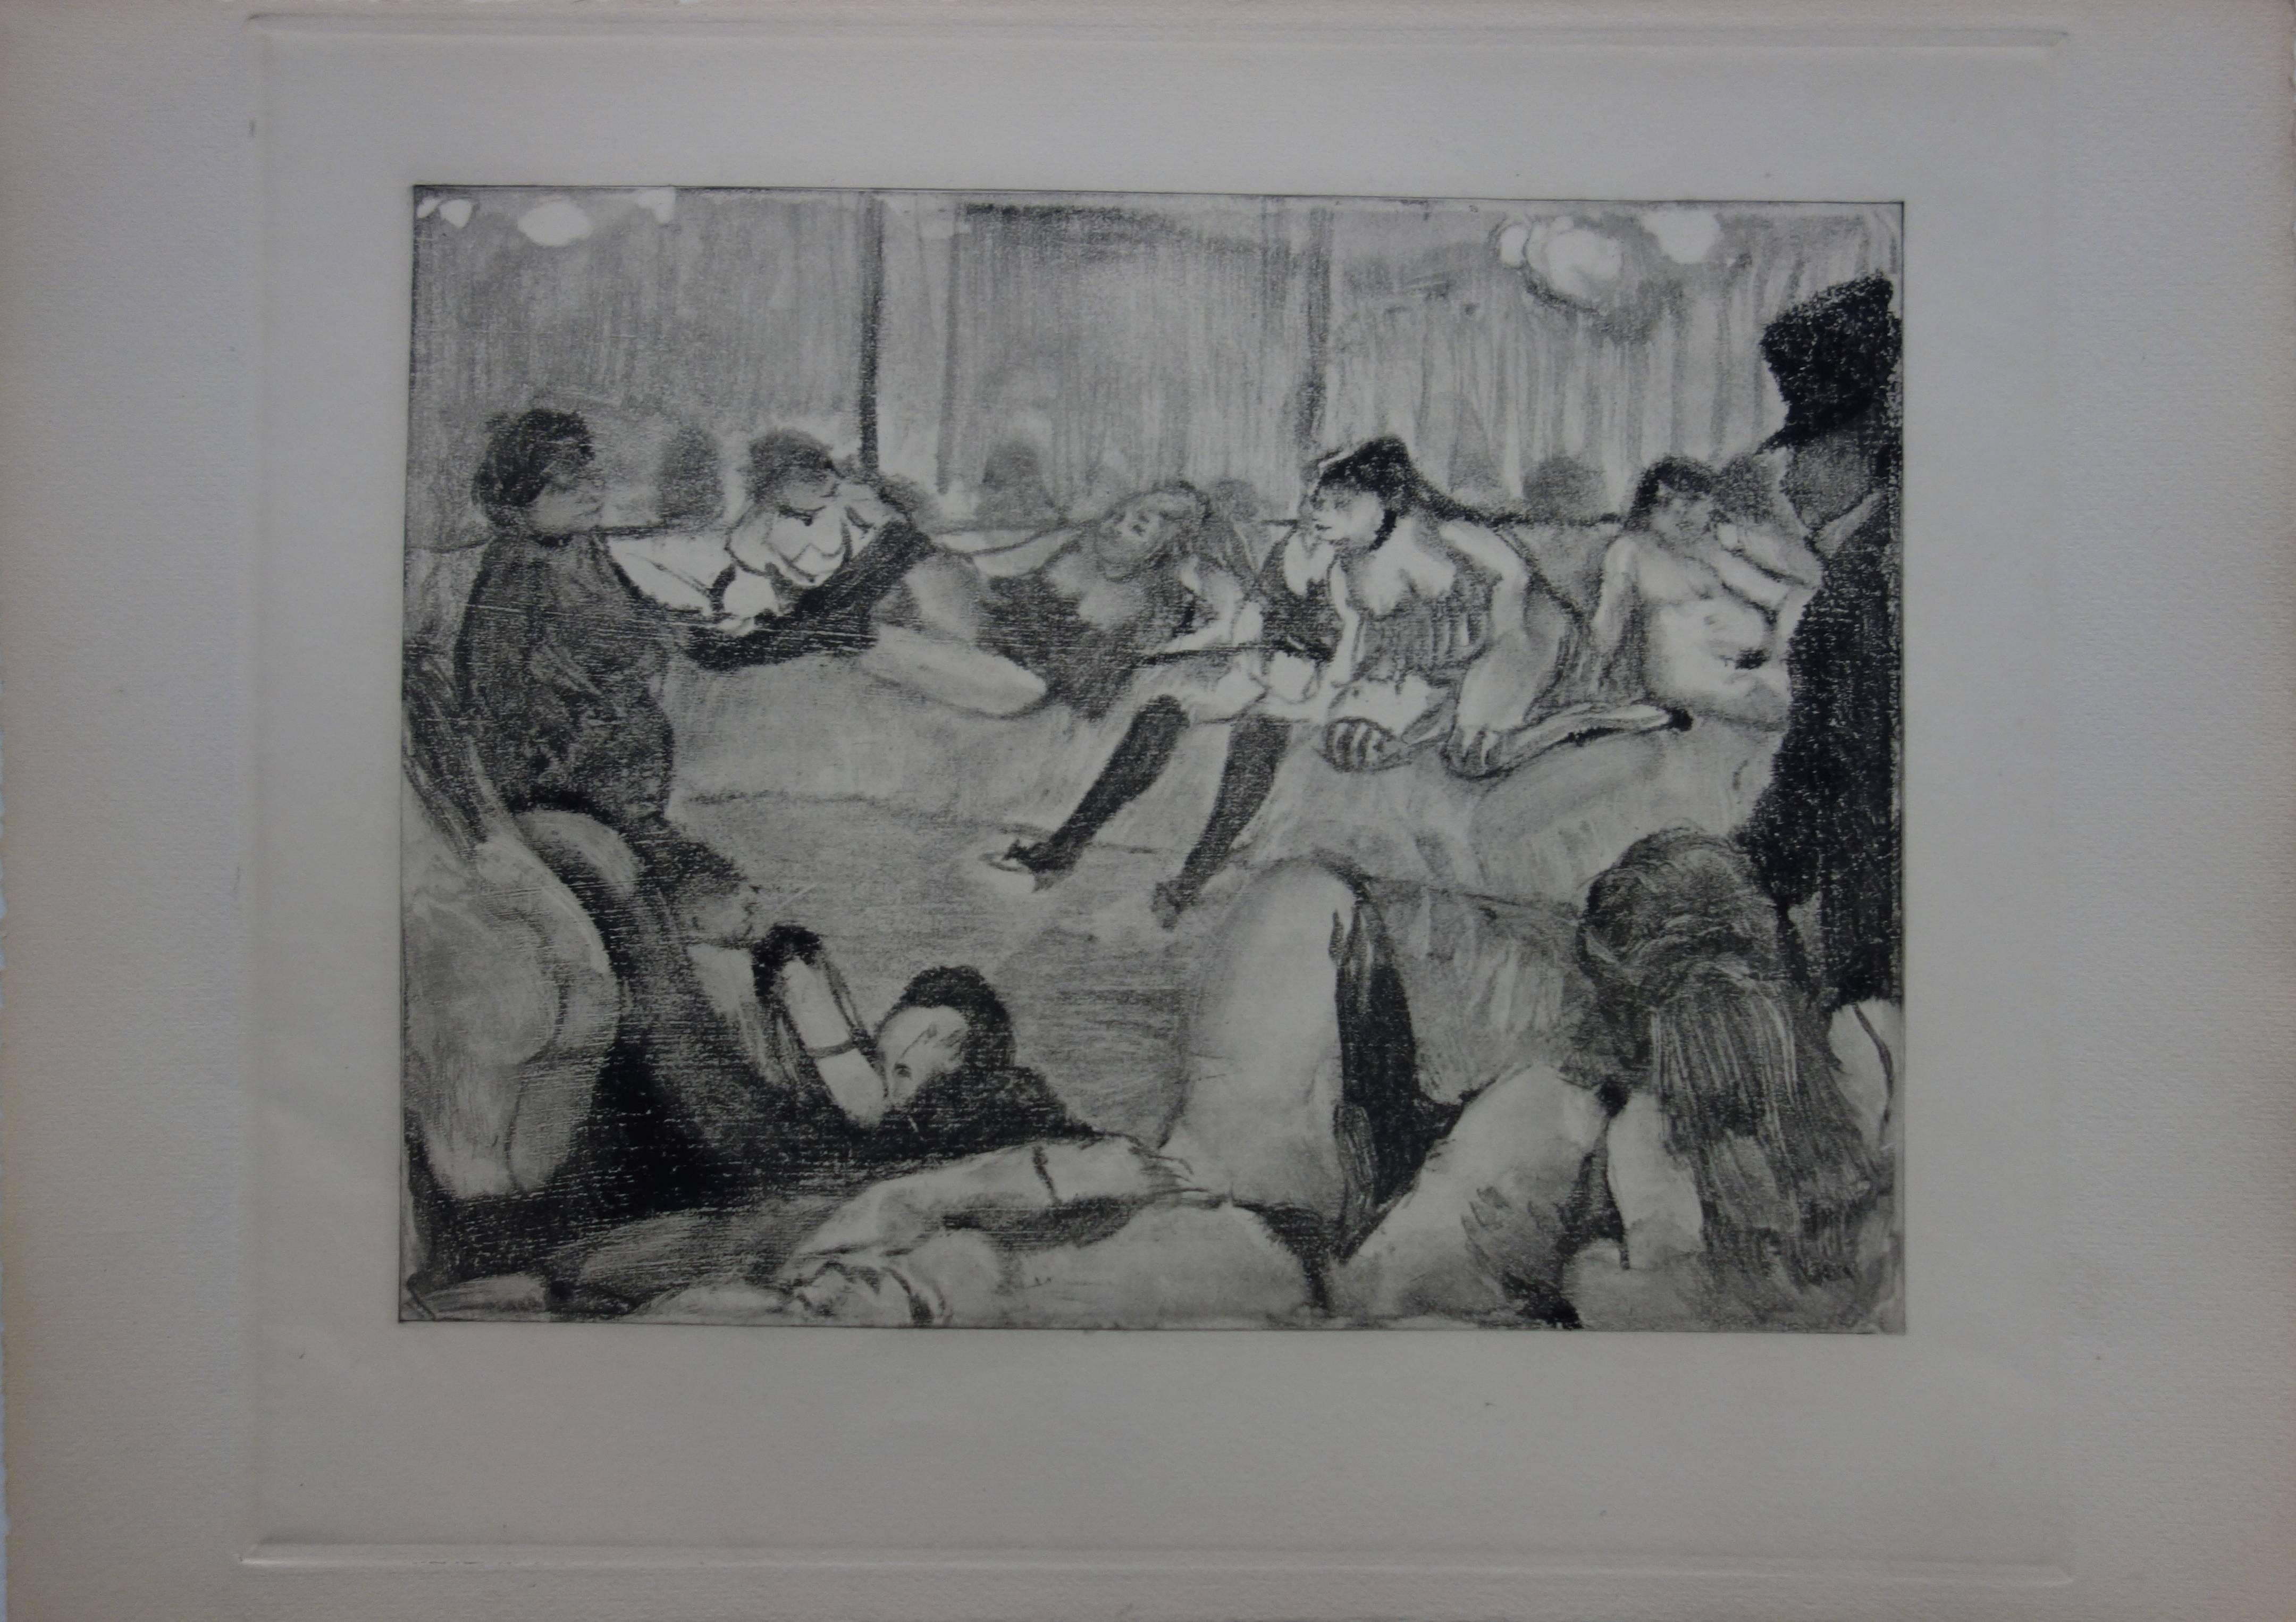 Client Arriving in a Whorehouse - Original etching - Print by (after) Edgar Degas